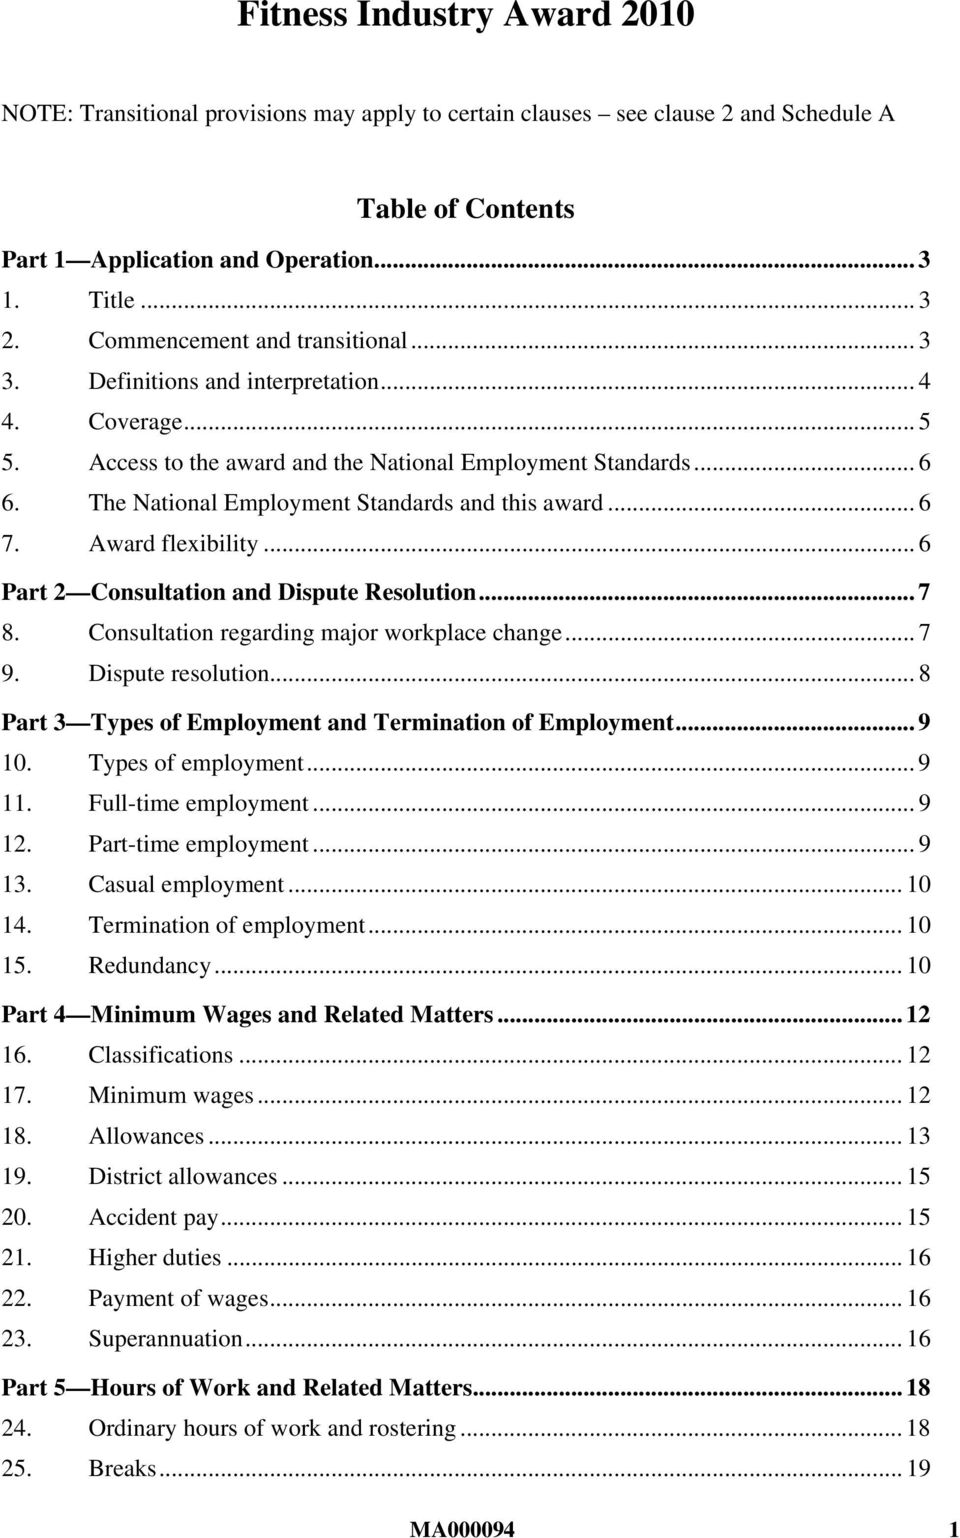 The National Employment Standards and this award... 6 7. Award flexibility... 6 Part 2 Consultation and Dispute Resolution... 7 8. Consultation regarding major workplace change... 7 9.